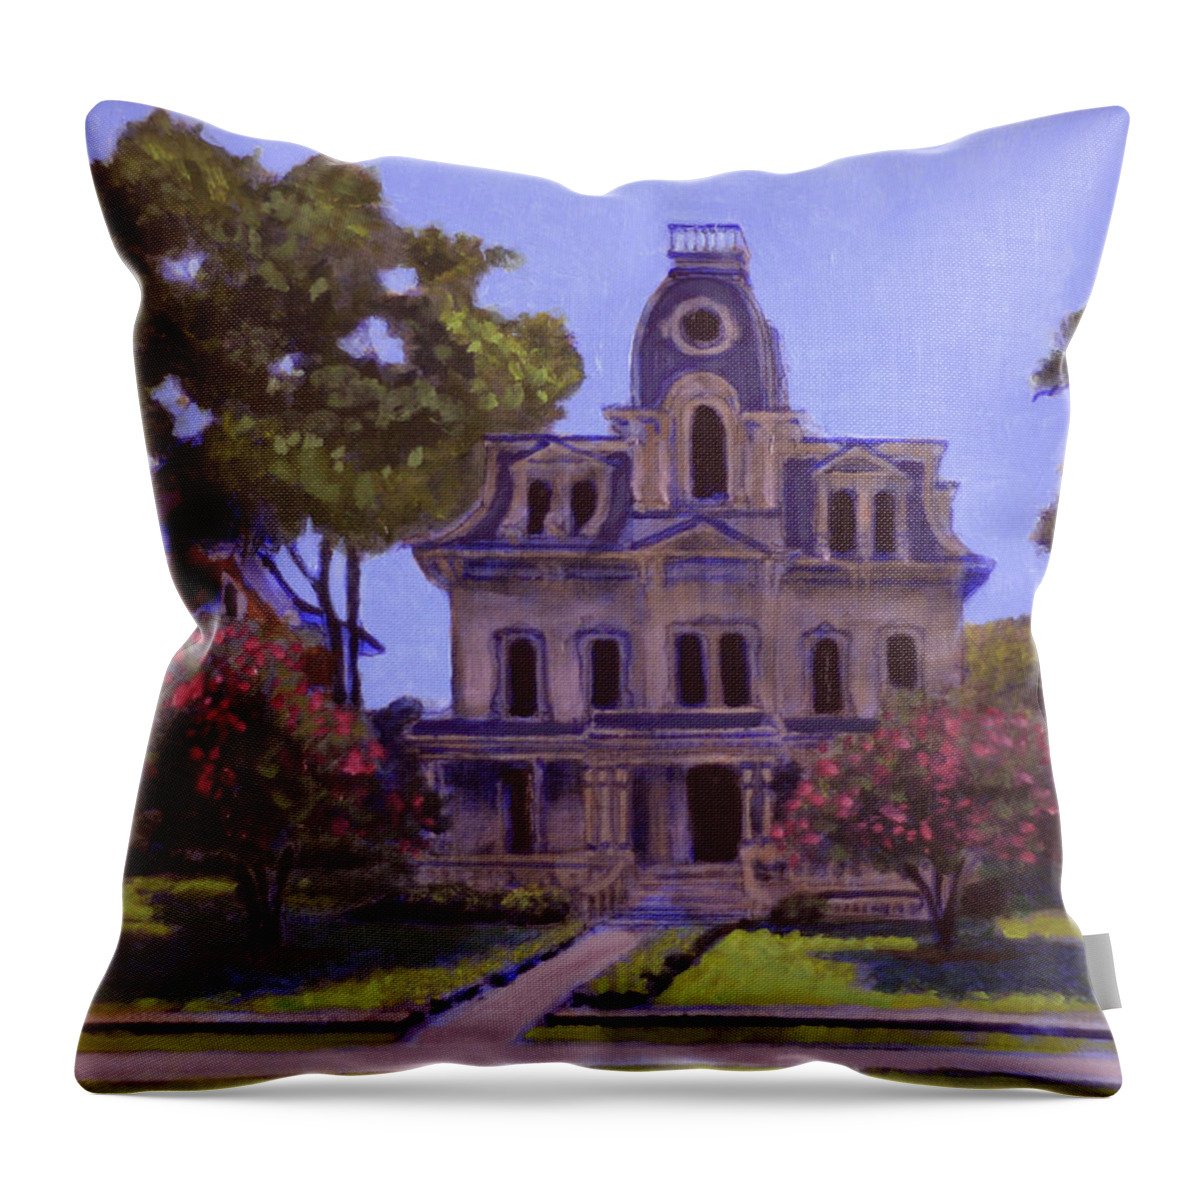 House Portrait Throw Pillow featuring the painting Heck Andrews House by David Zimmerman